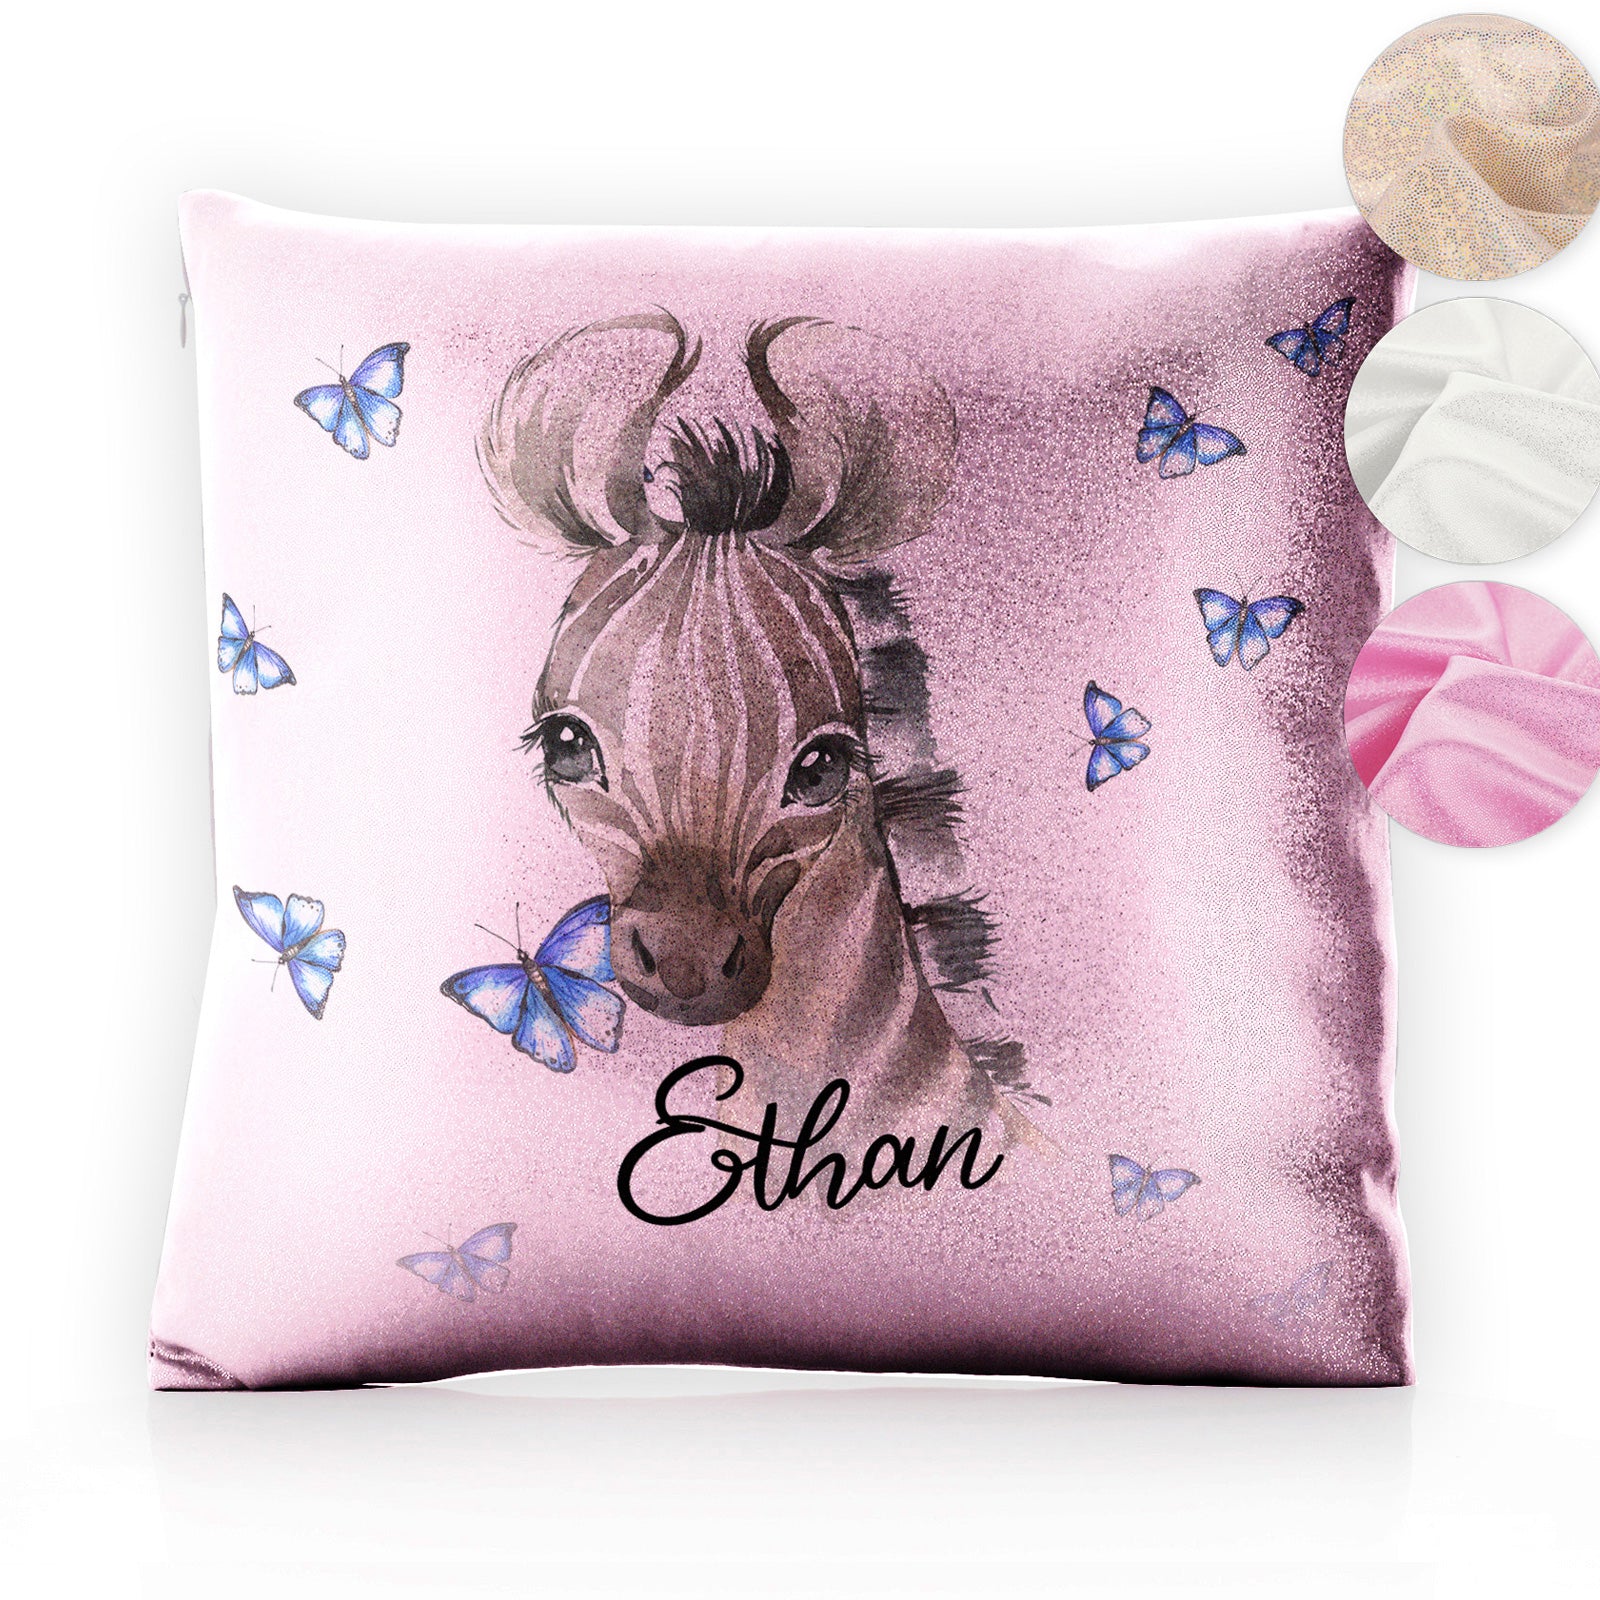 Personalised Glitter Cushion with Zebra Blue Butterfly and Cute Text